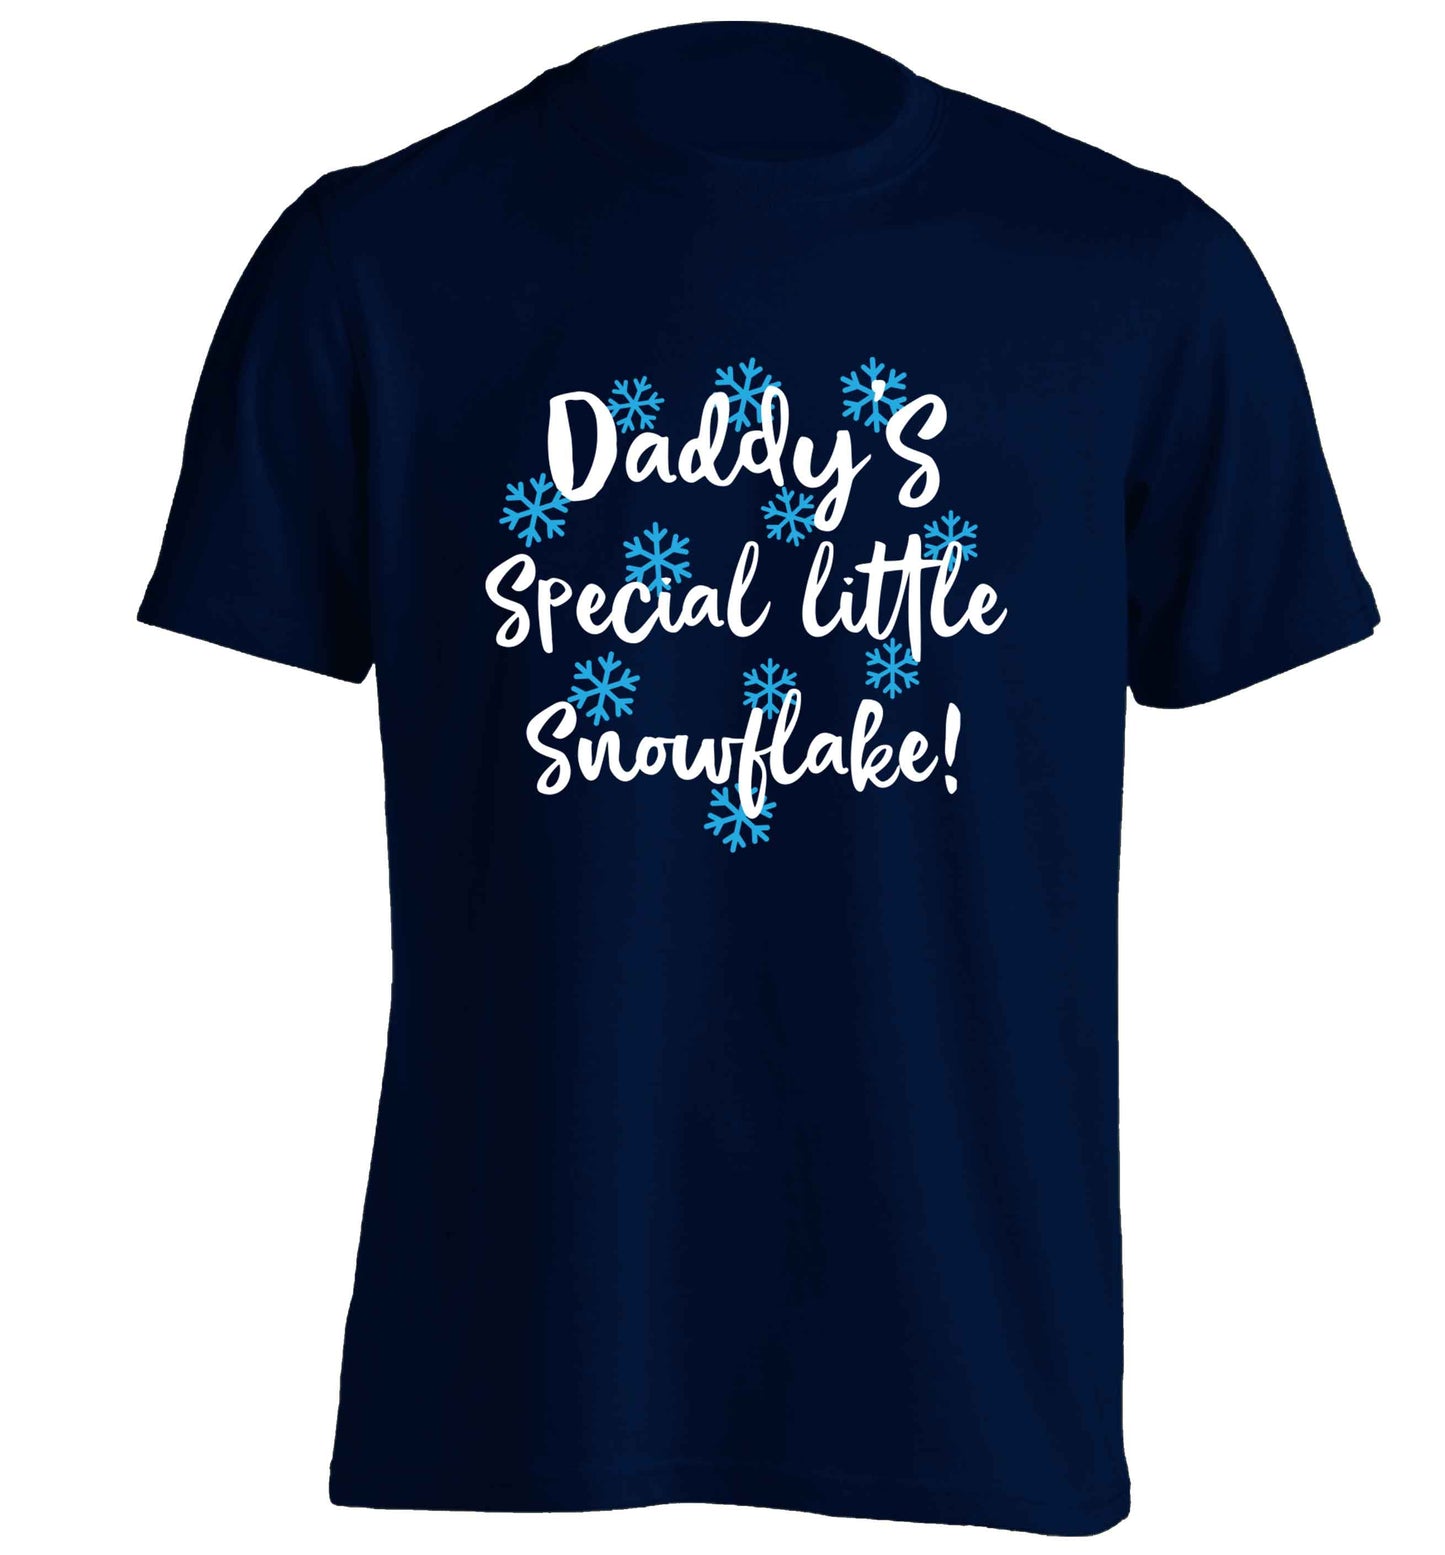 Daddy's special little snowflake adults unisex navy Tshirt 2XL